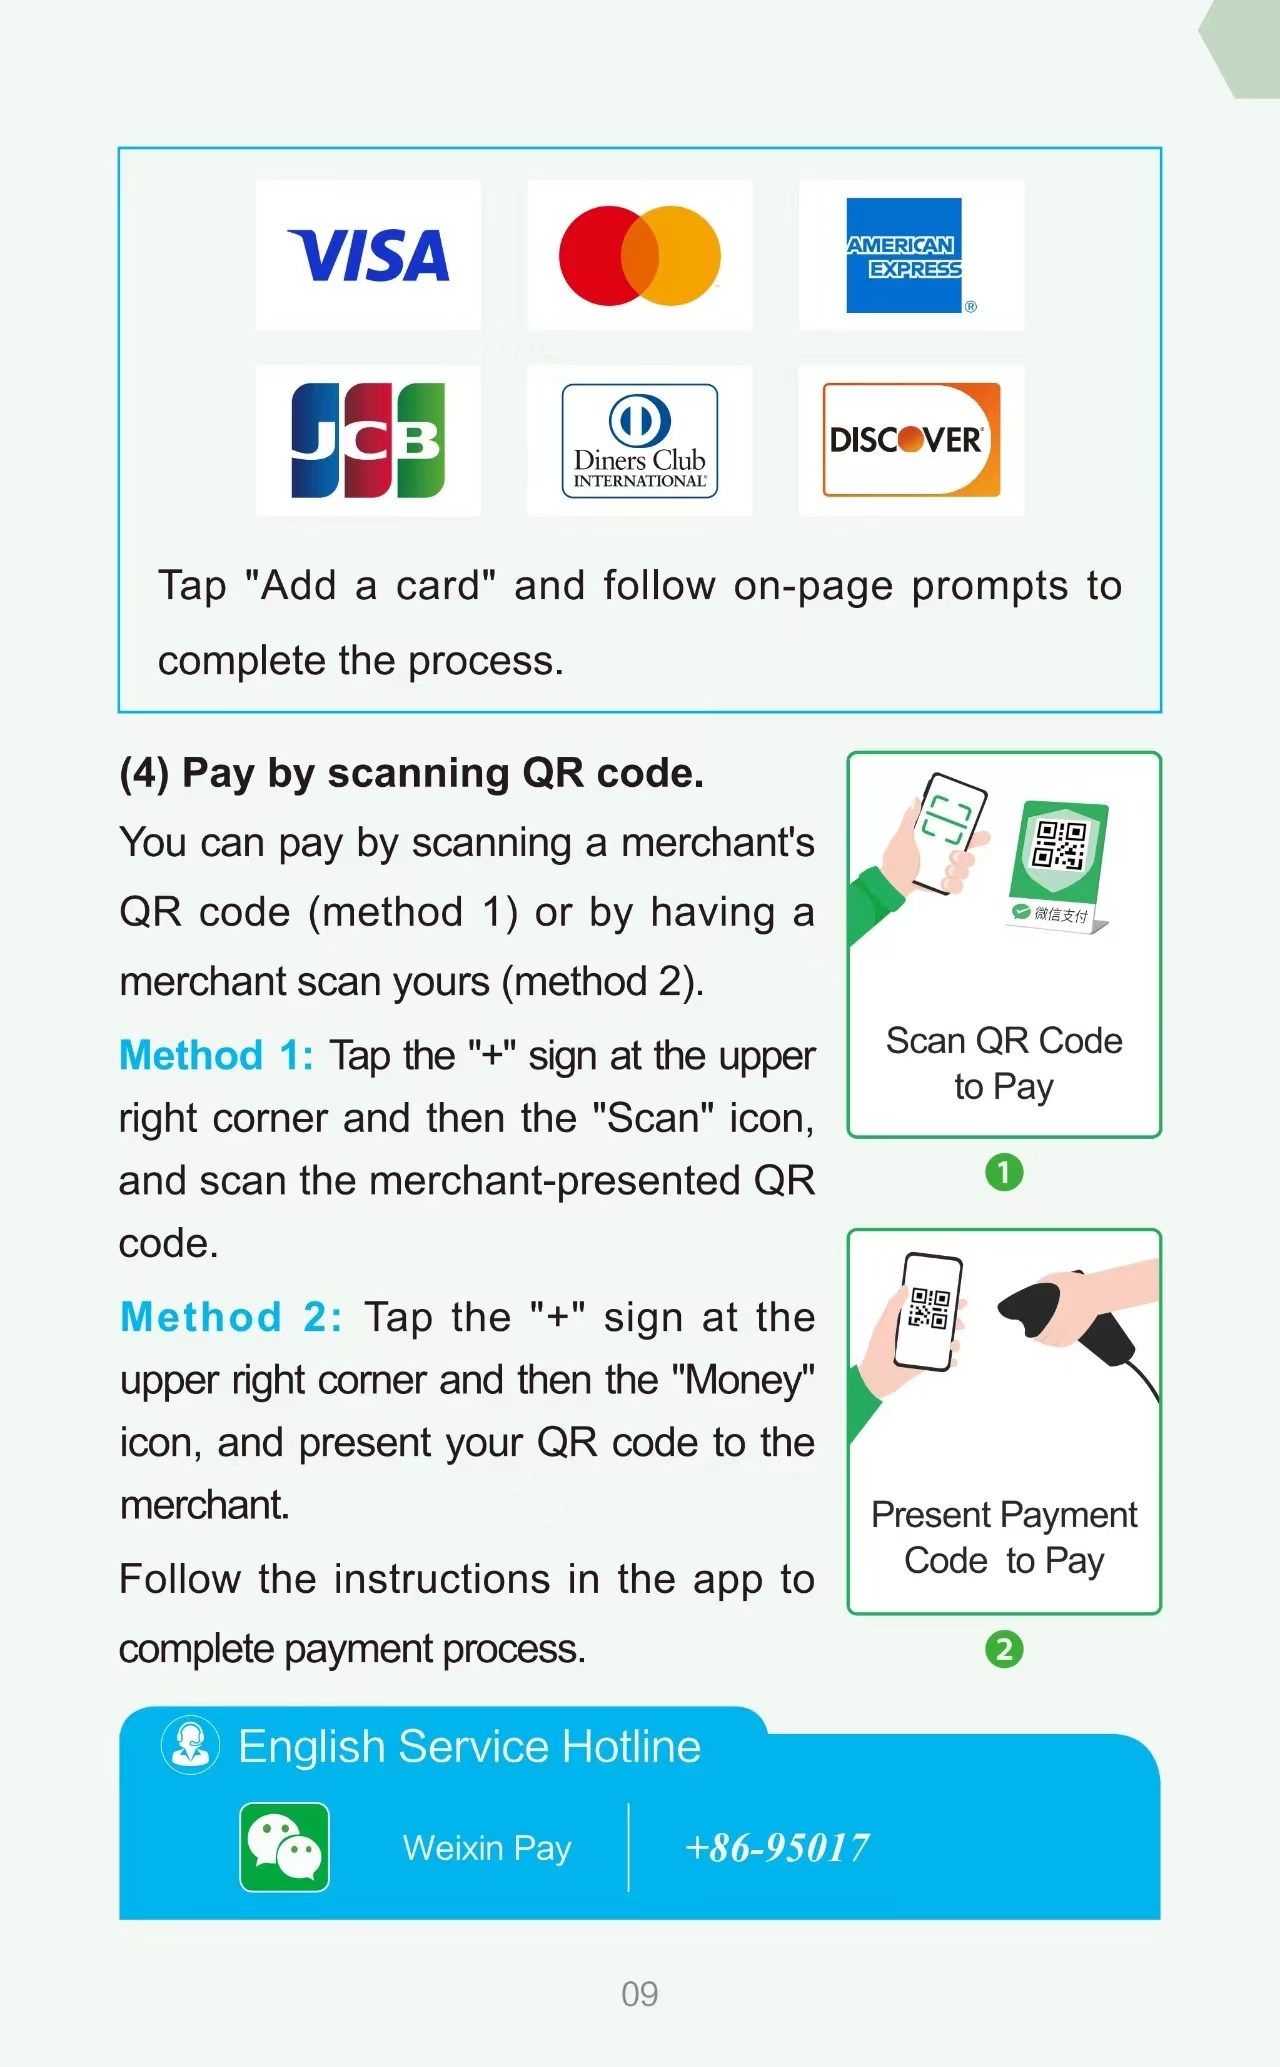 How to Set up Alipay Account